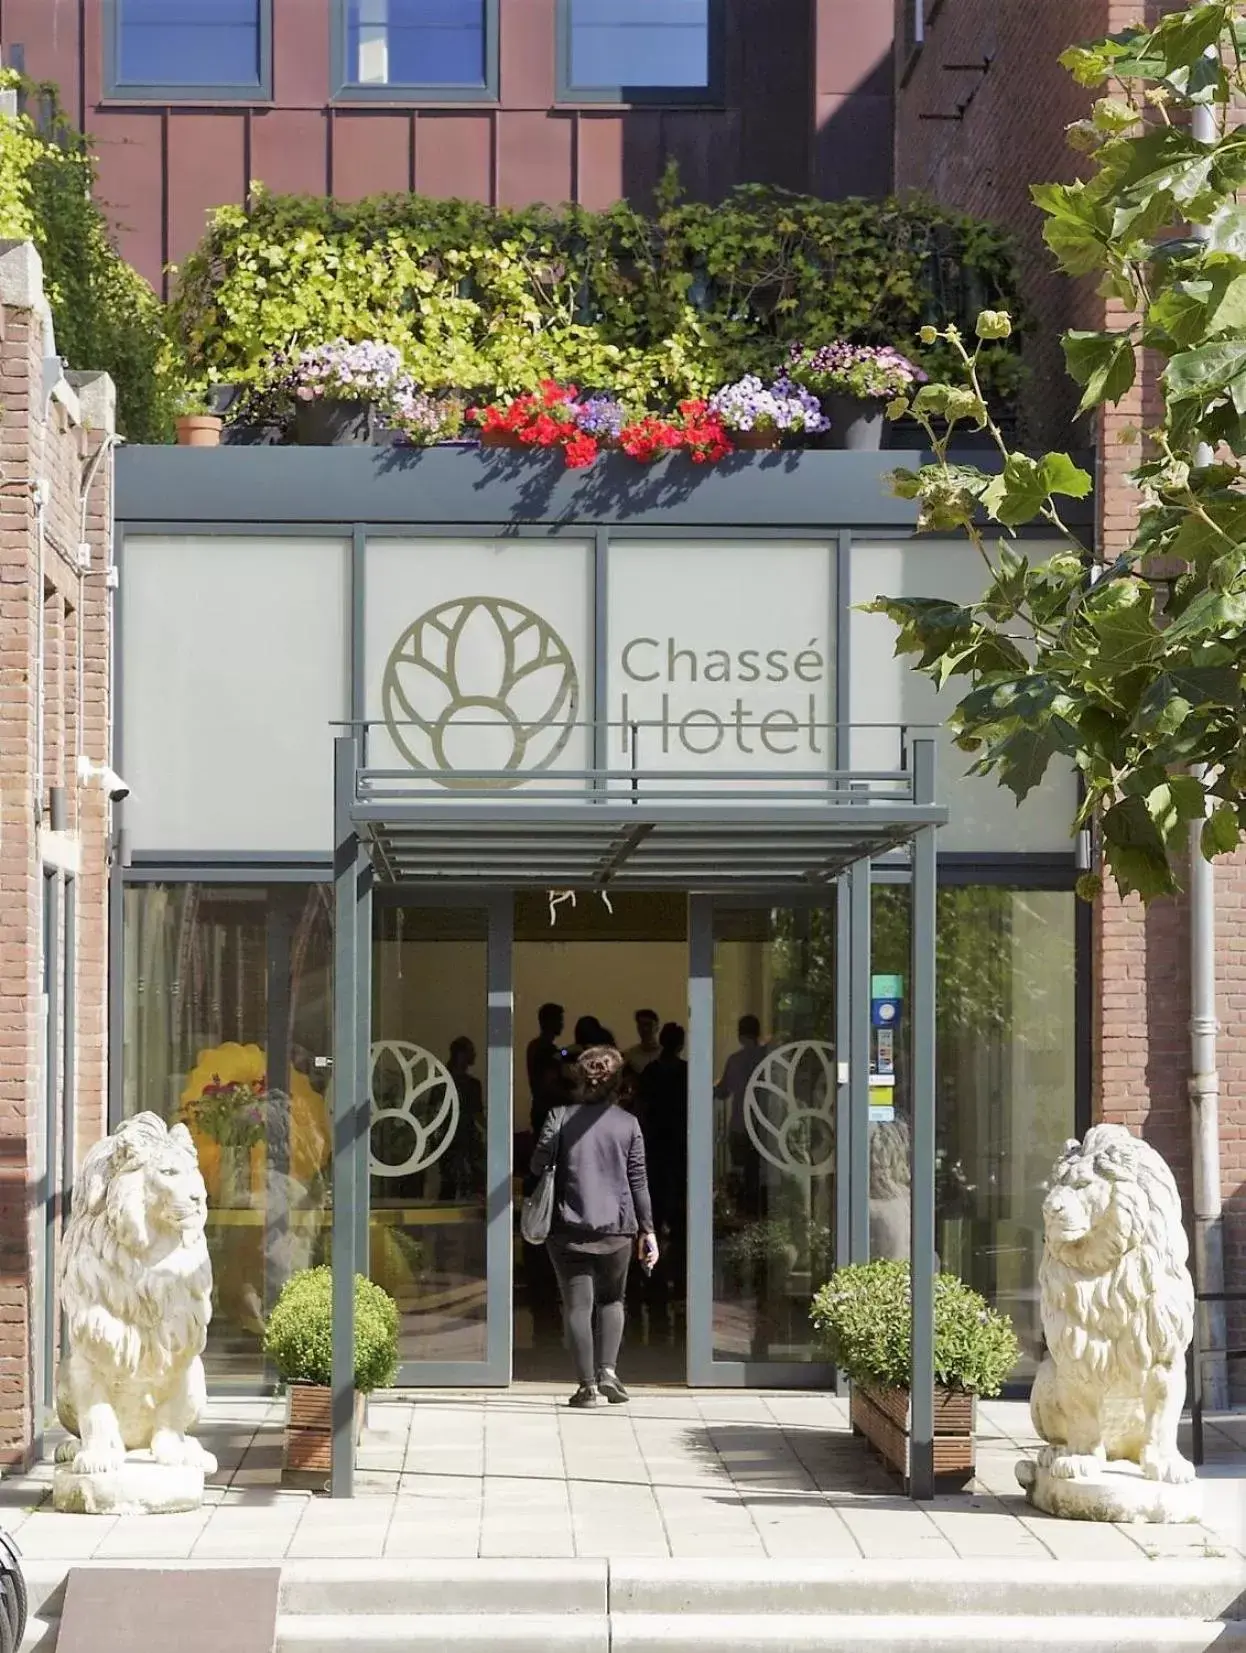 Facade/entrance in Chasse Hotel